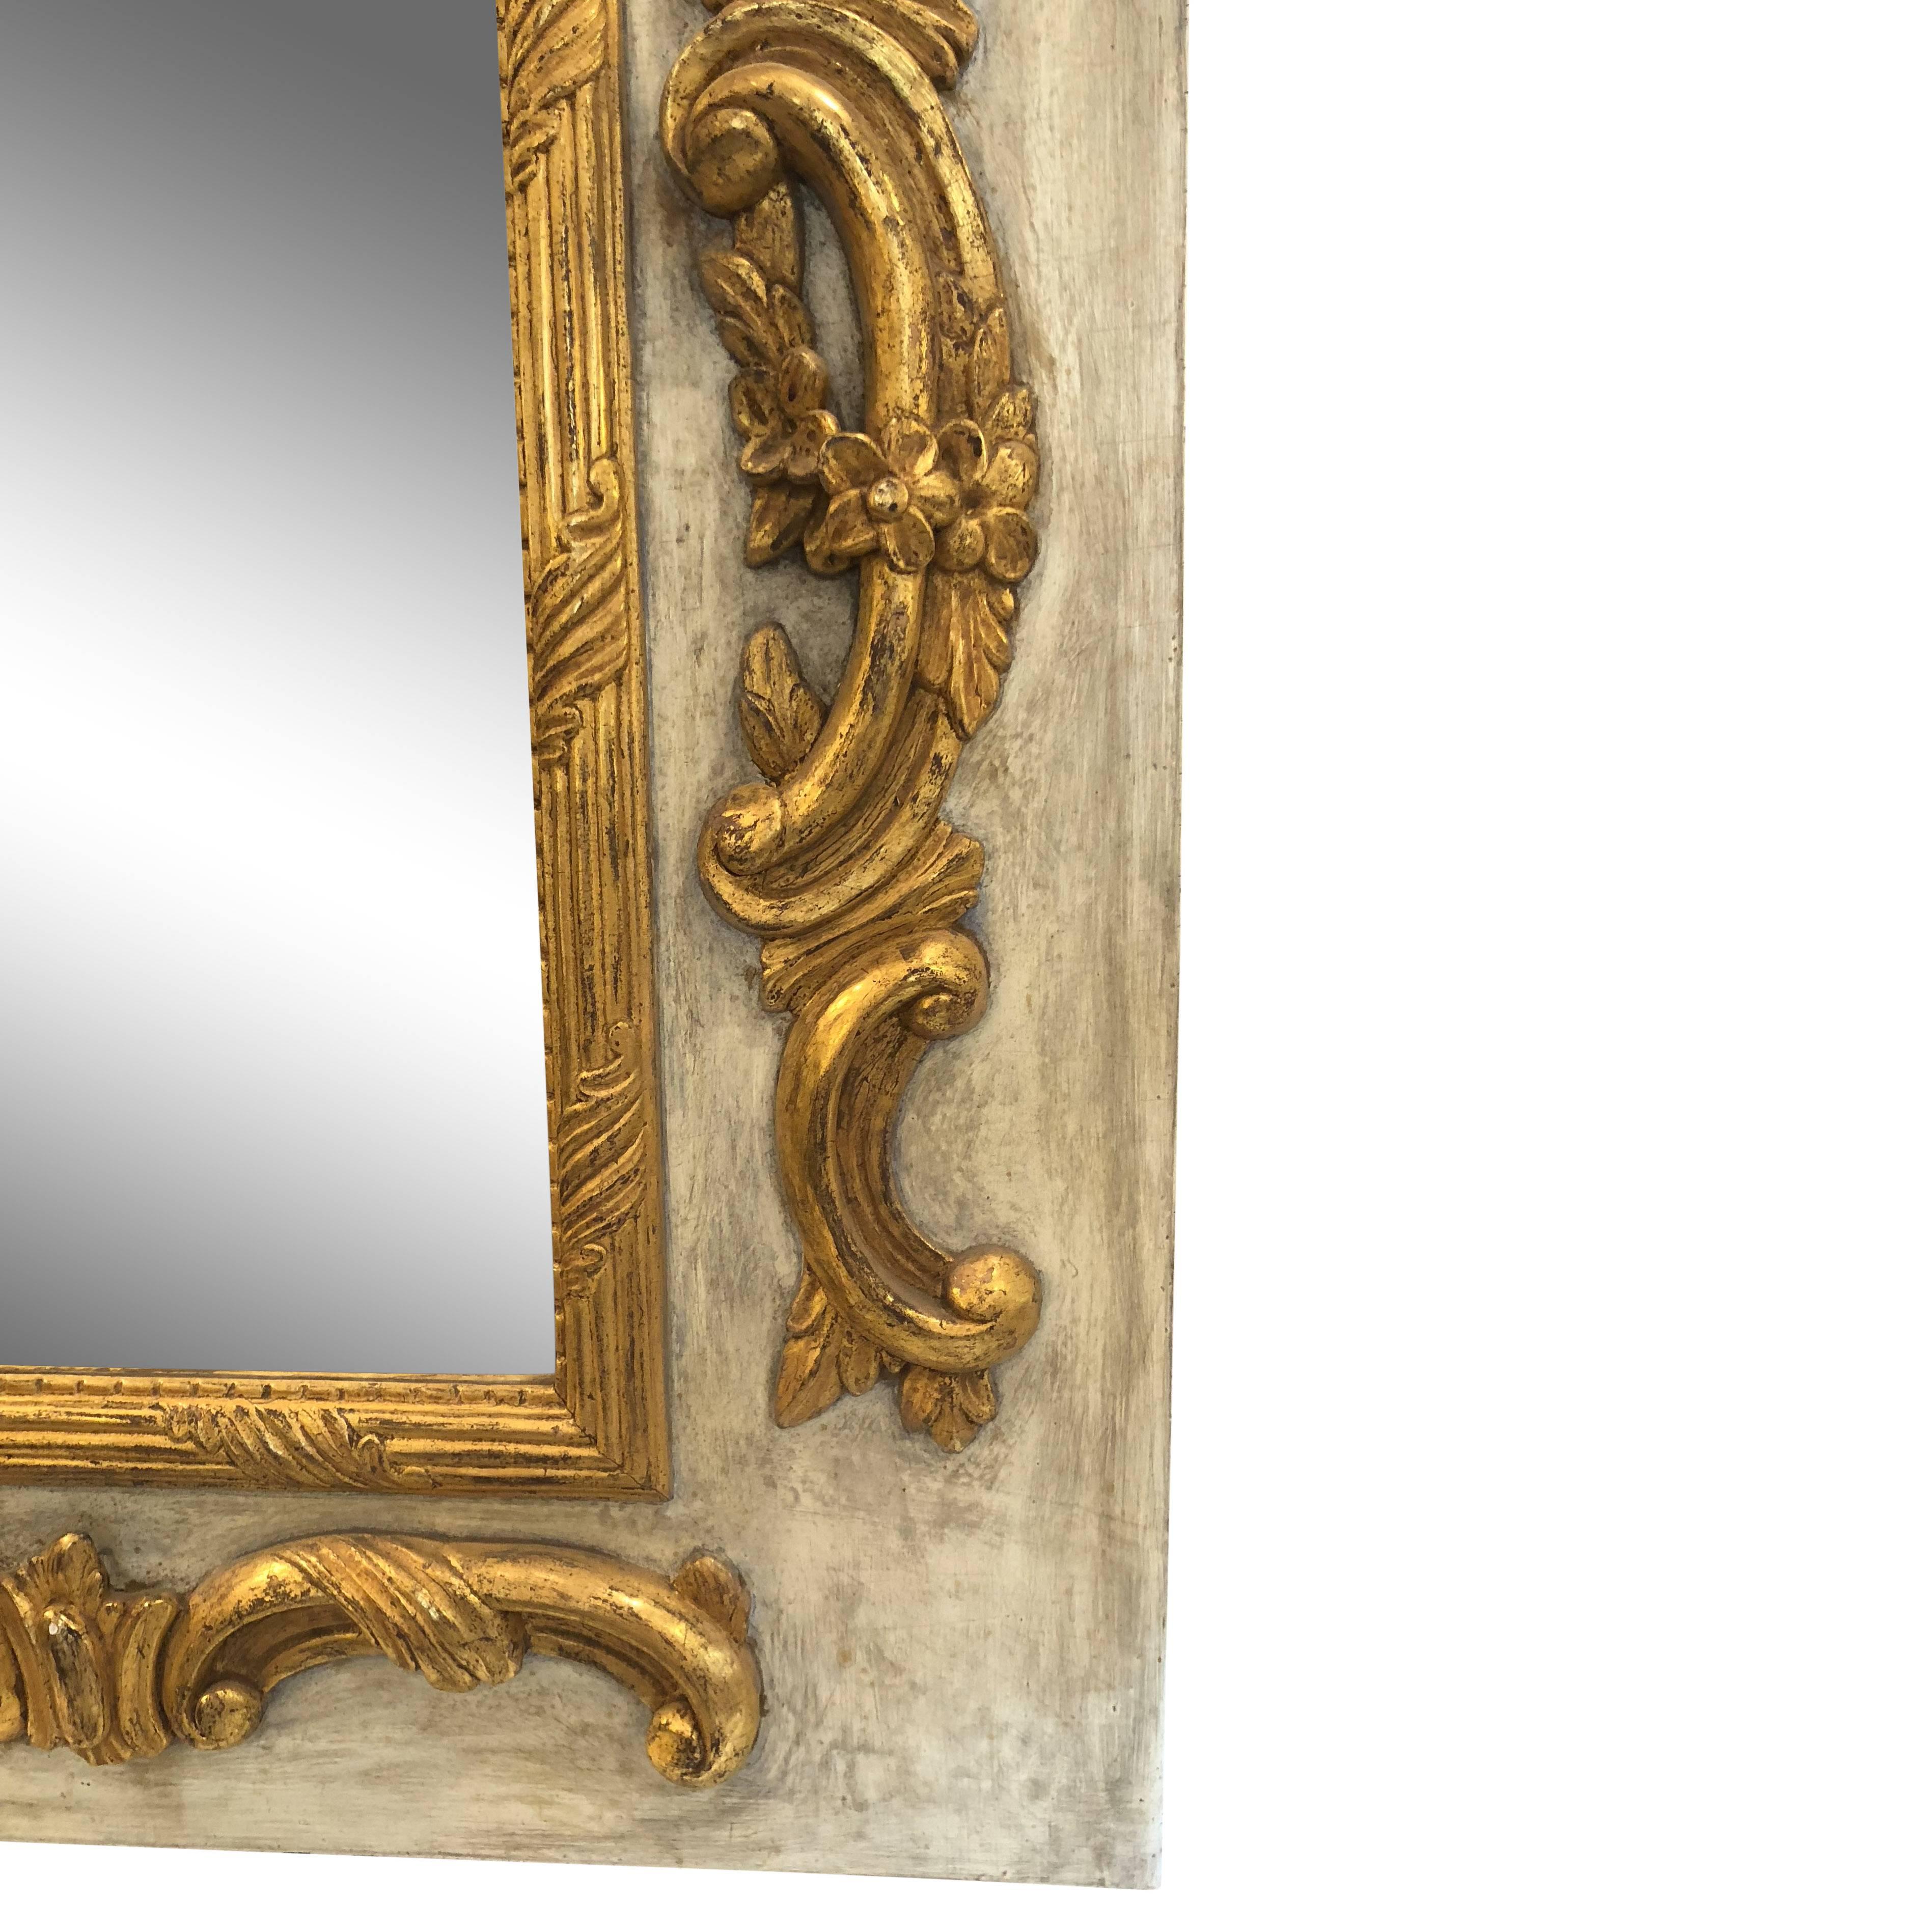 Louis XVI period mirror with intricate gold carved and gilded wood. Mirror has a beautiful antiqued finish.